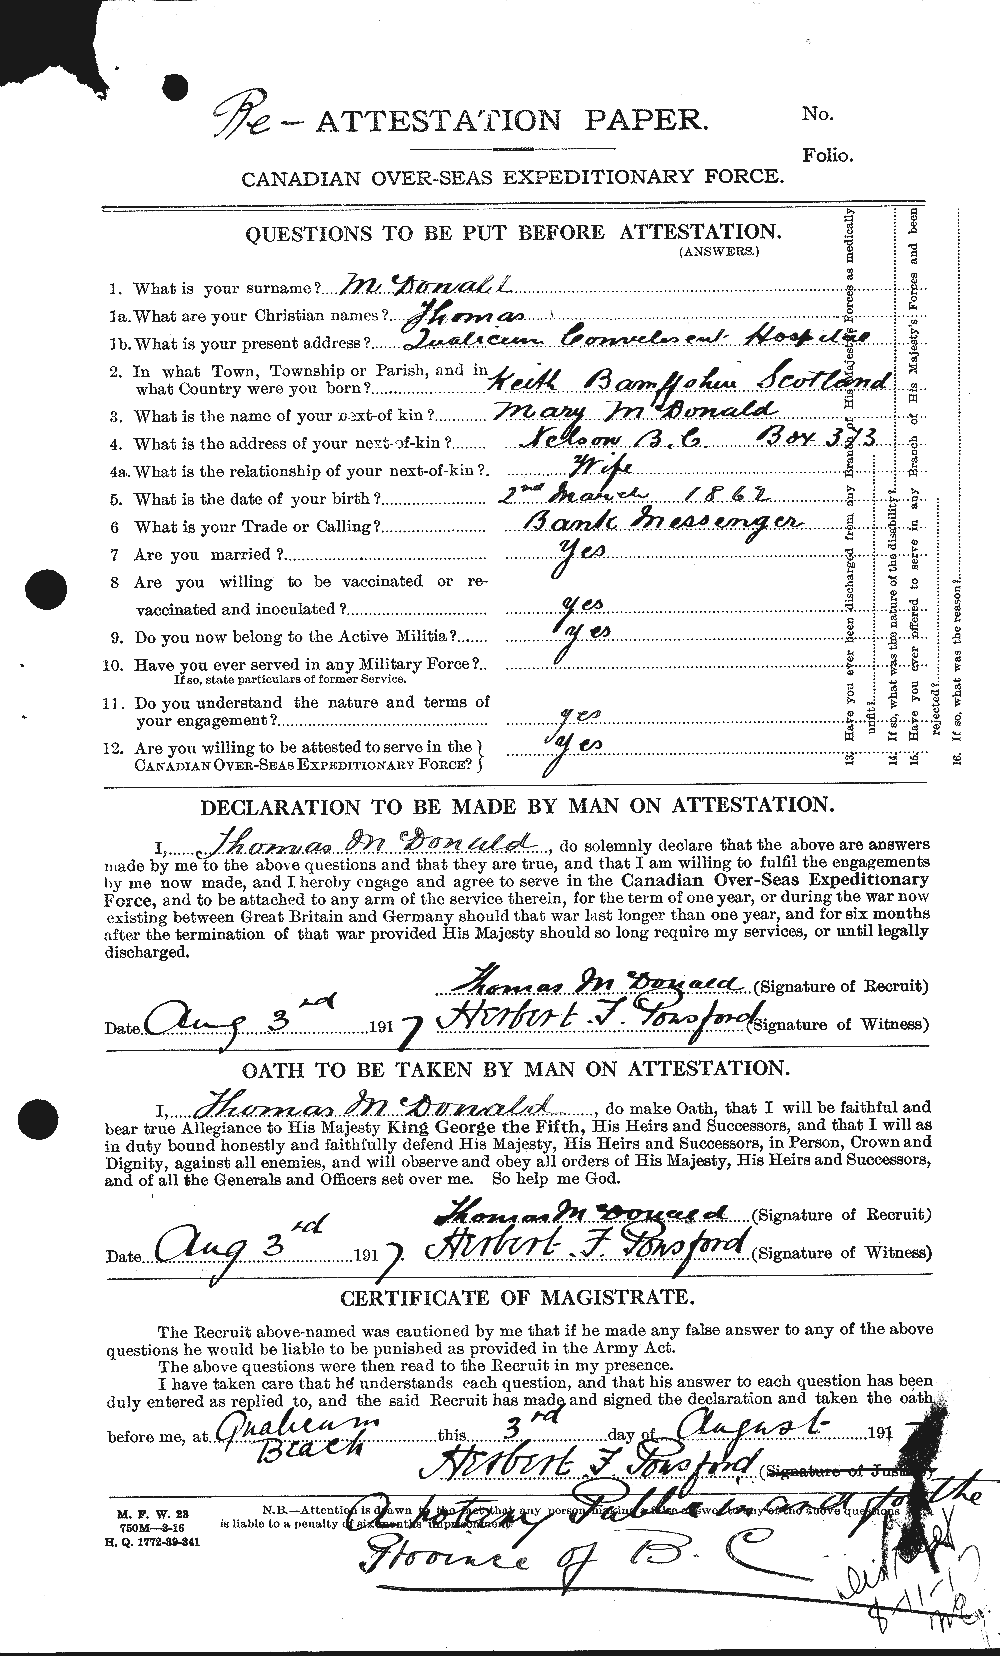 Personnel Records of the First World War - CEF 519813a